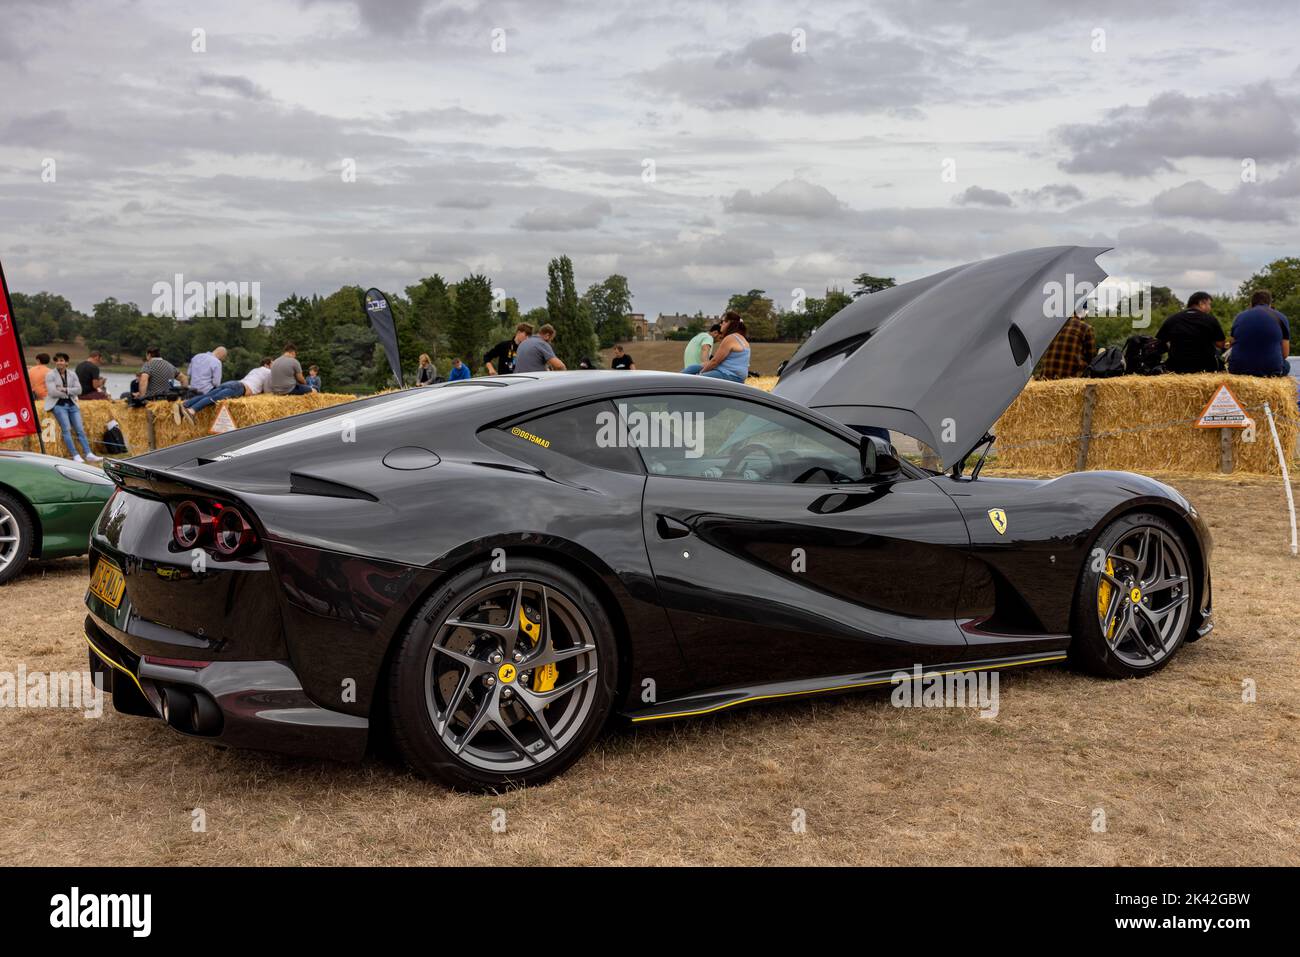 Ferrari 812 Superfast, on display at the Salon Privé Concours d’Elégance motor show held at Blenheim Palace Stock Photo